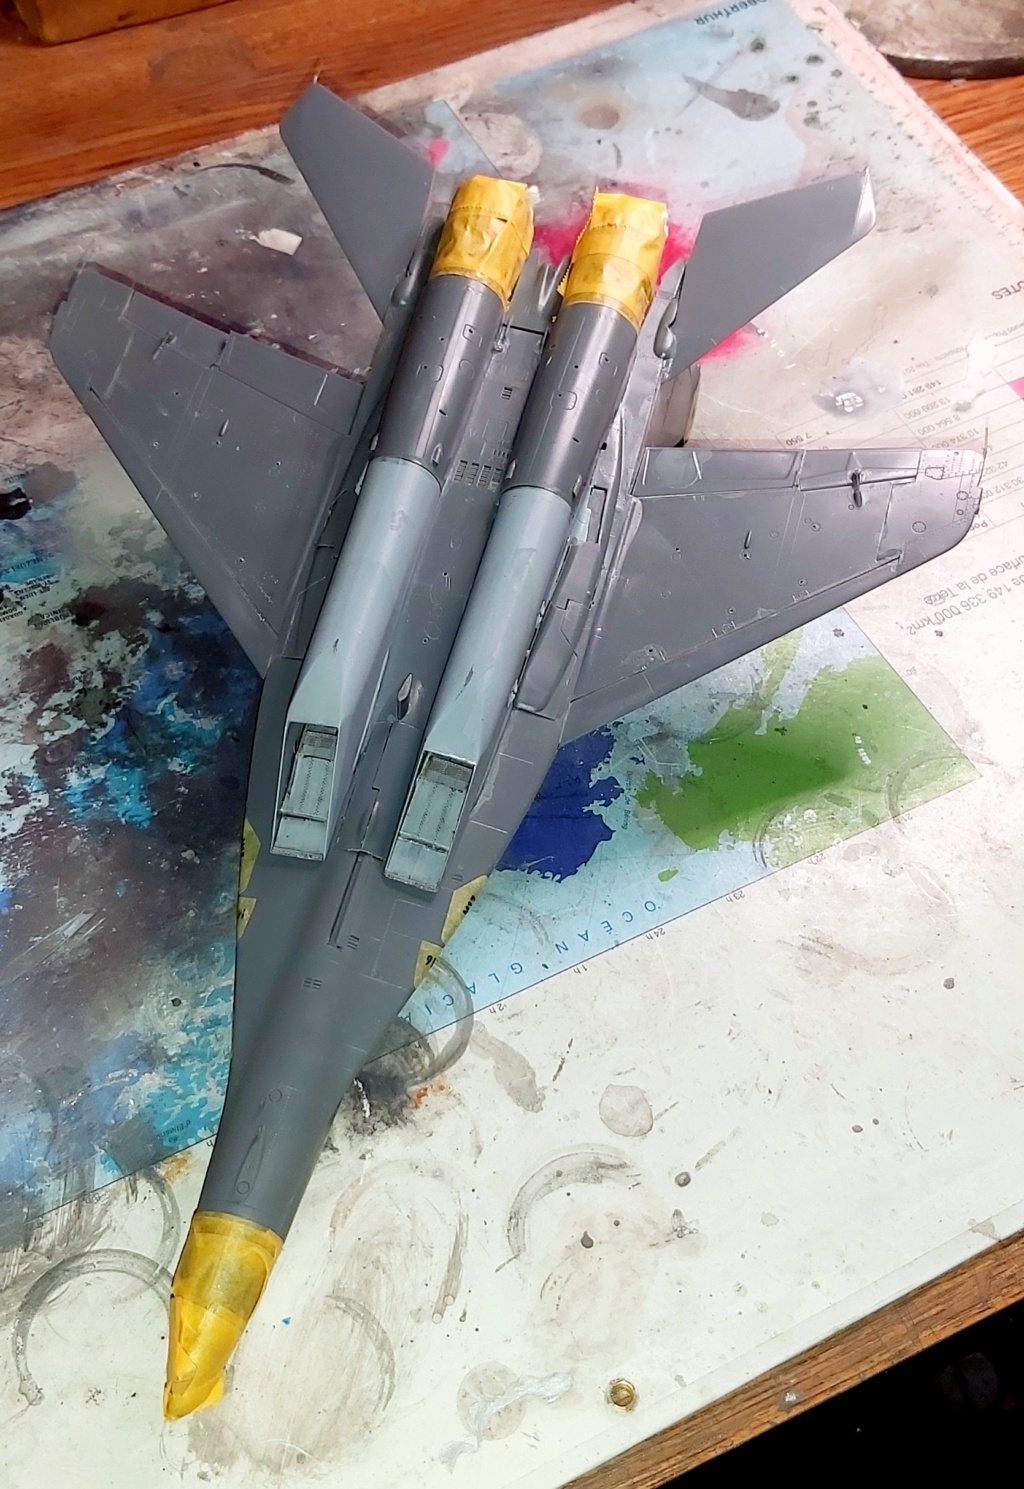 [Great Wall Hobby] 1/48 - Mikoyan-Gourevitch Mig-29 9-12 Fulcrum (A) JG3 LSK/LV DDR (RDA)  - Page 2 20230188